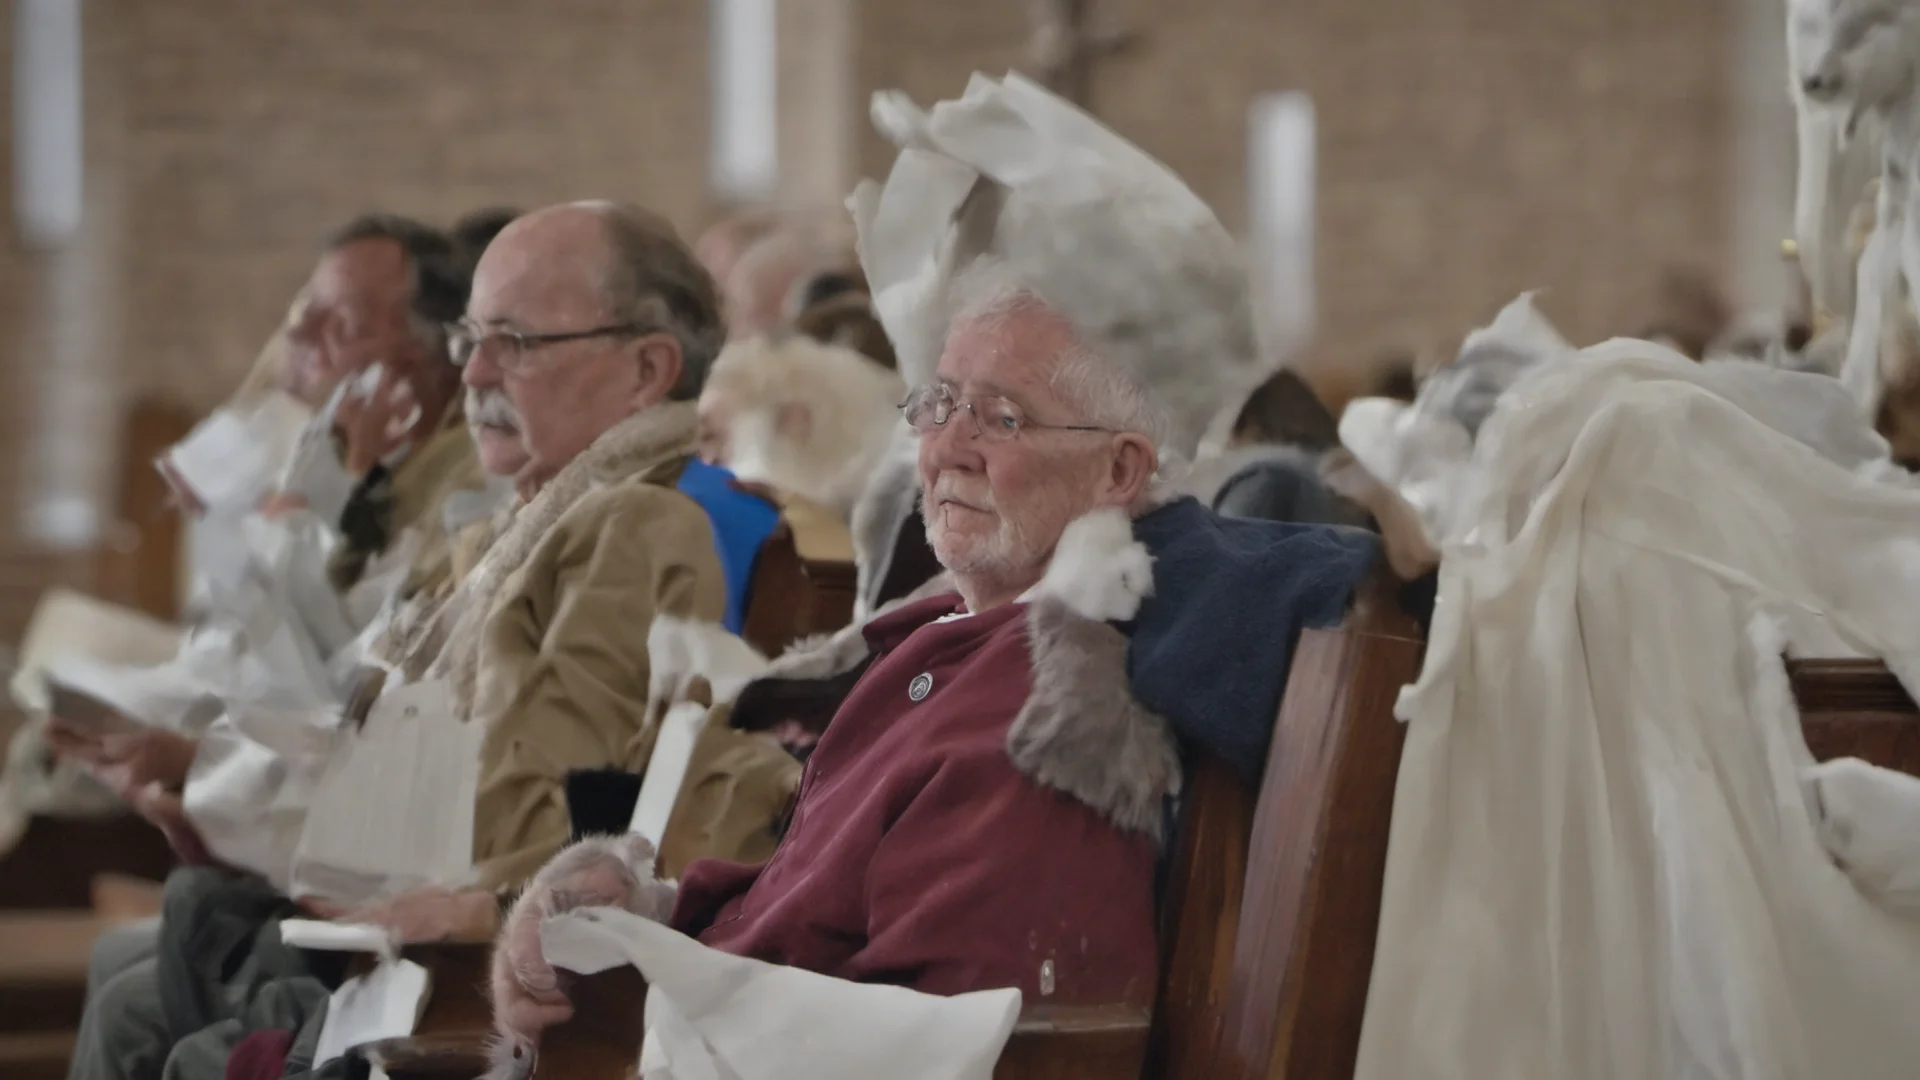 endeavor photographic of new england parishioner sitting on pew of church that just got air conditioning that is so cold there are icicles forming on his brow wide